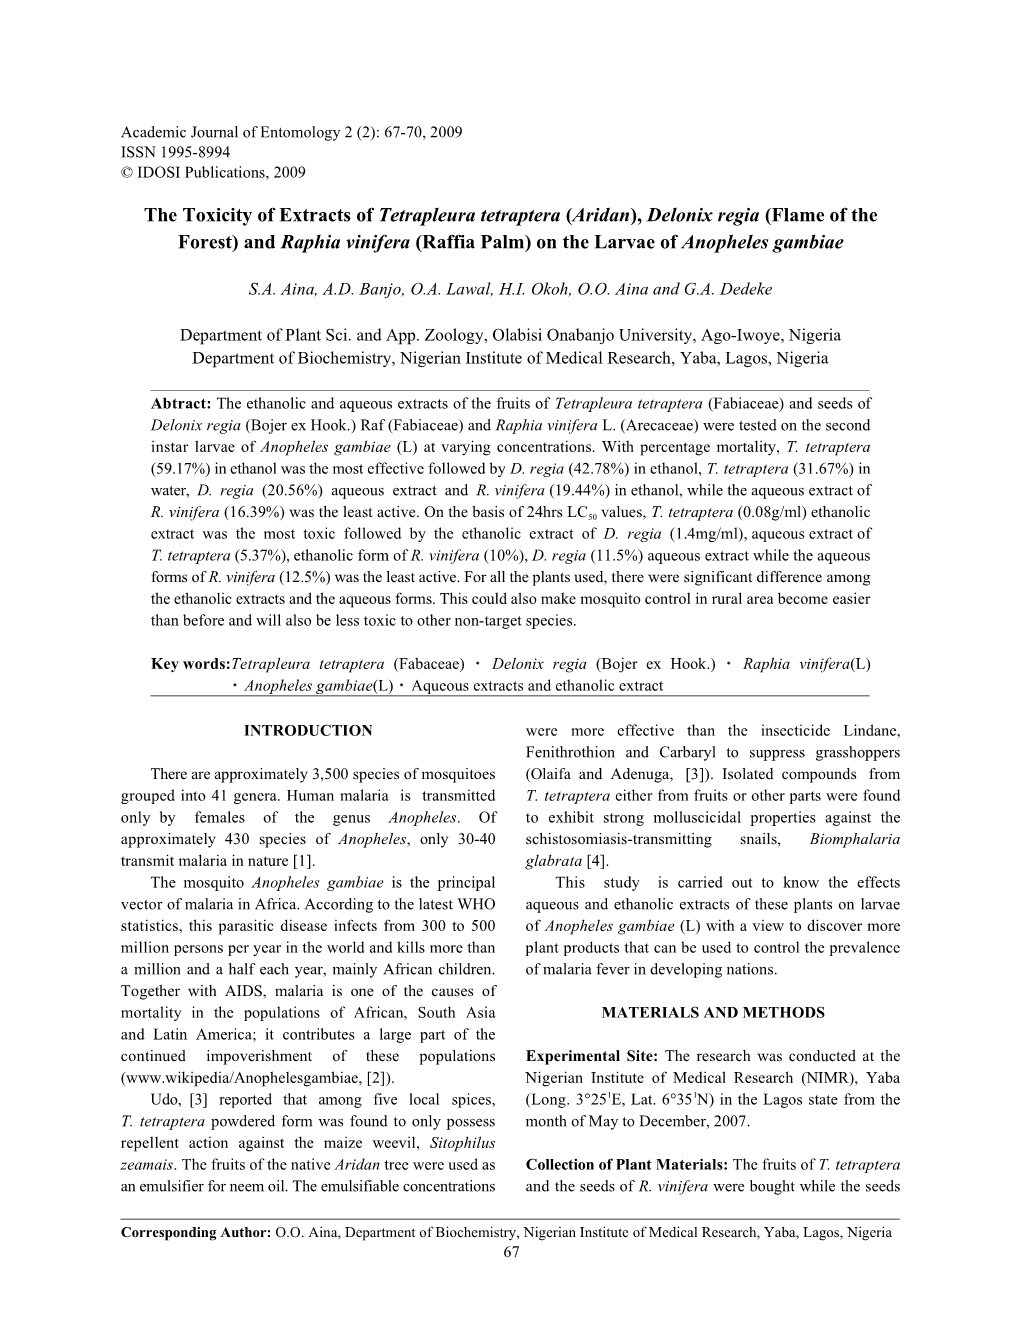 The Toxicity of Extracts of Tetrapleura Tetraptera (Aridan), Delonix Regia (Flame of the Forest) and Raphia Vinifera (Raffia Palm) on the Larvae of Anopheles Gambiae